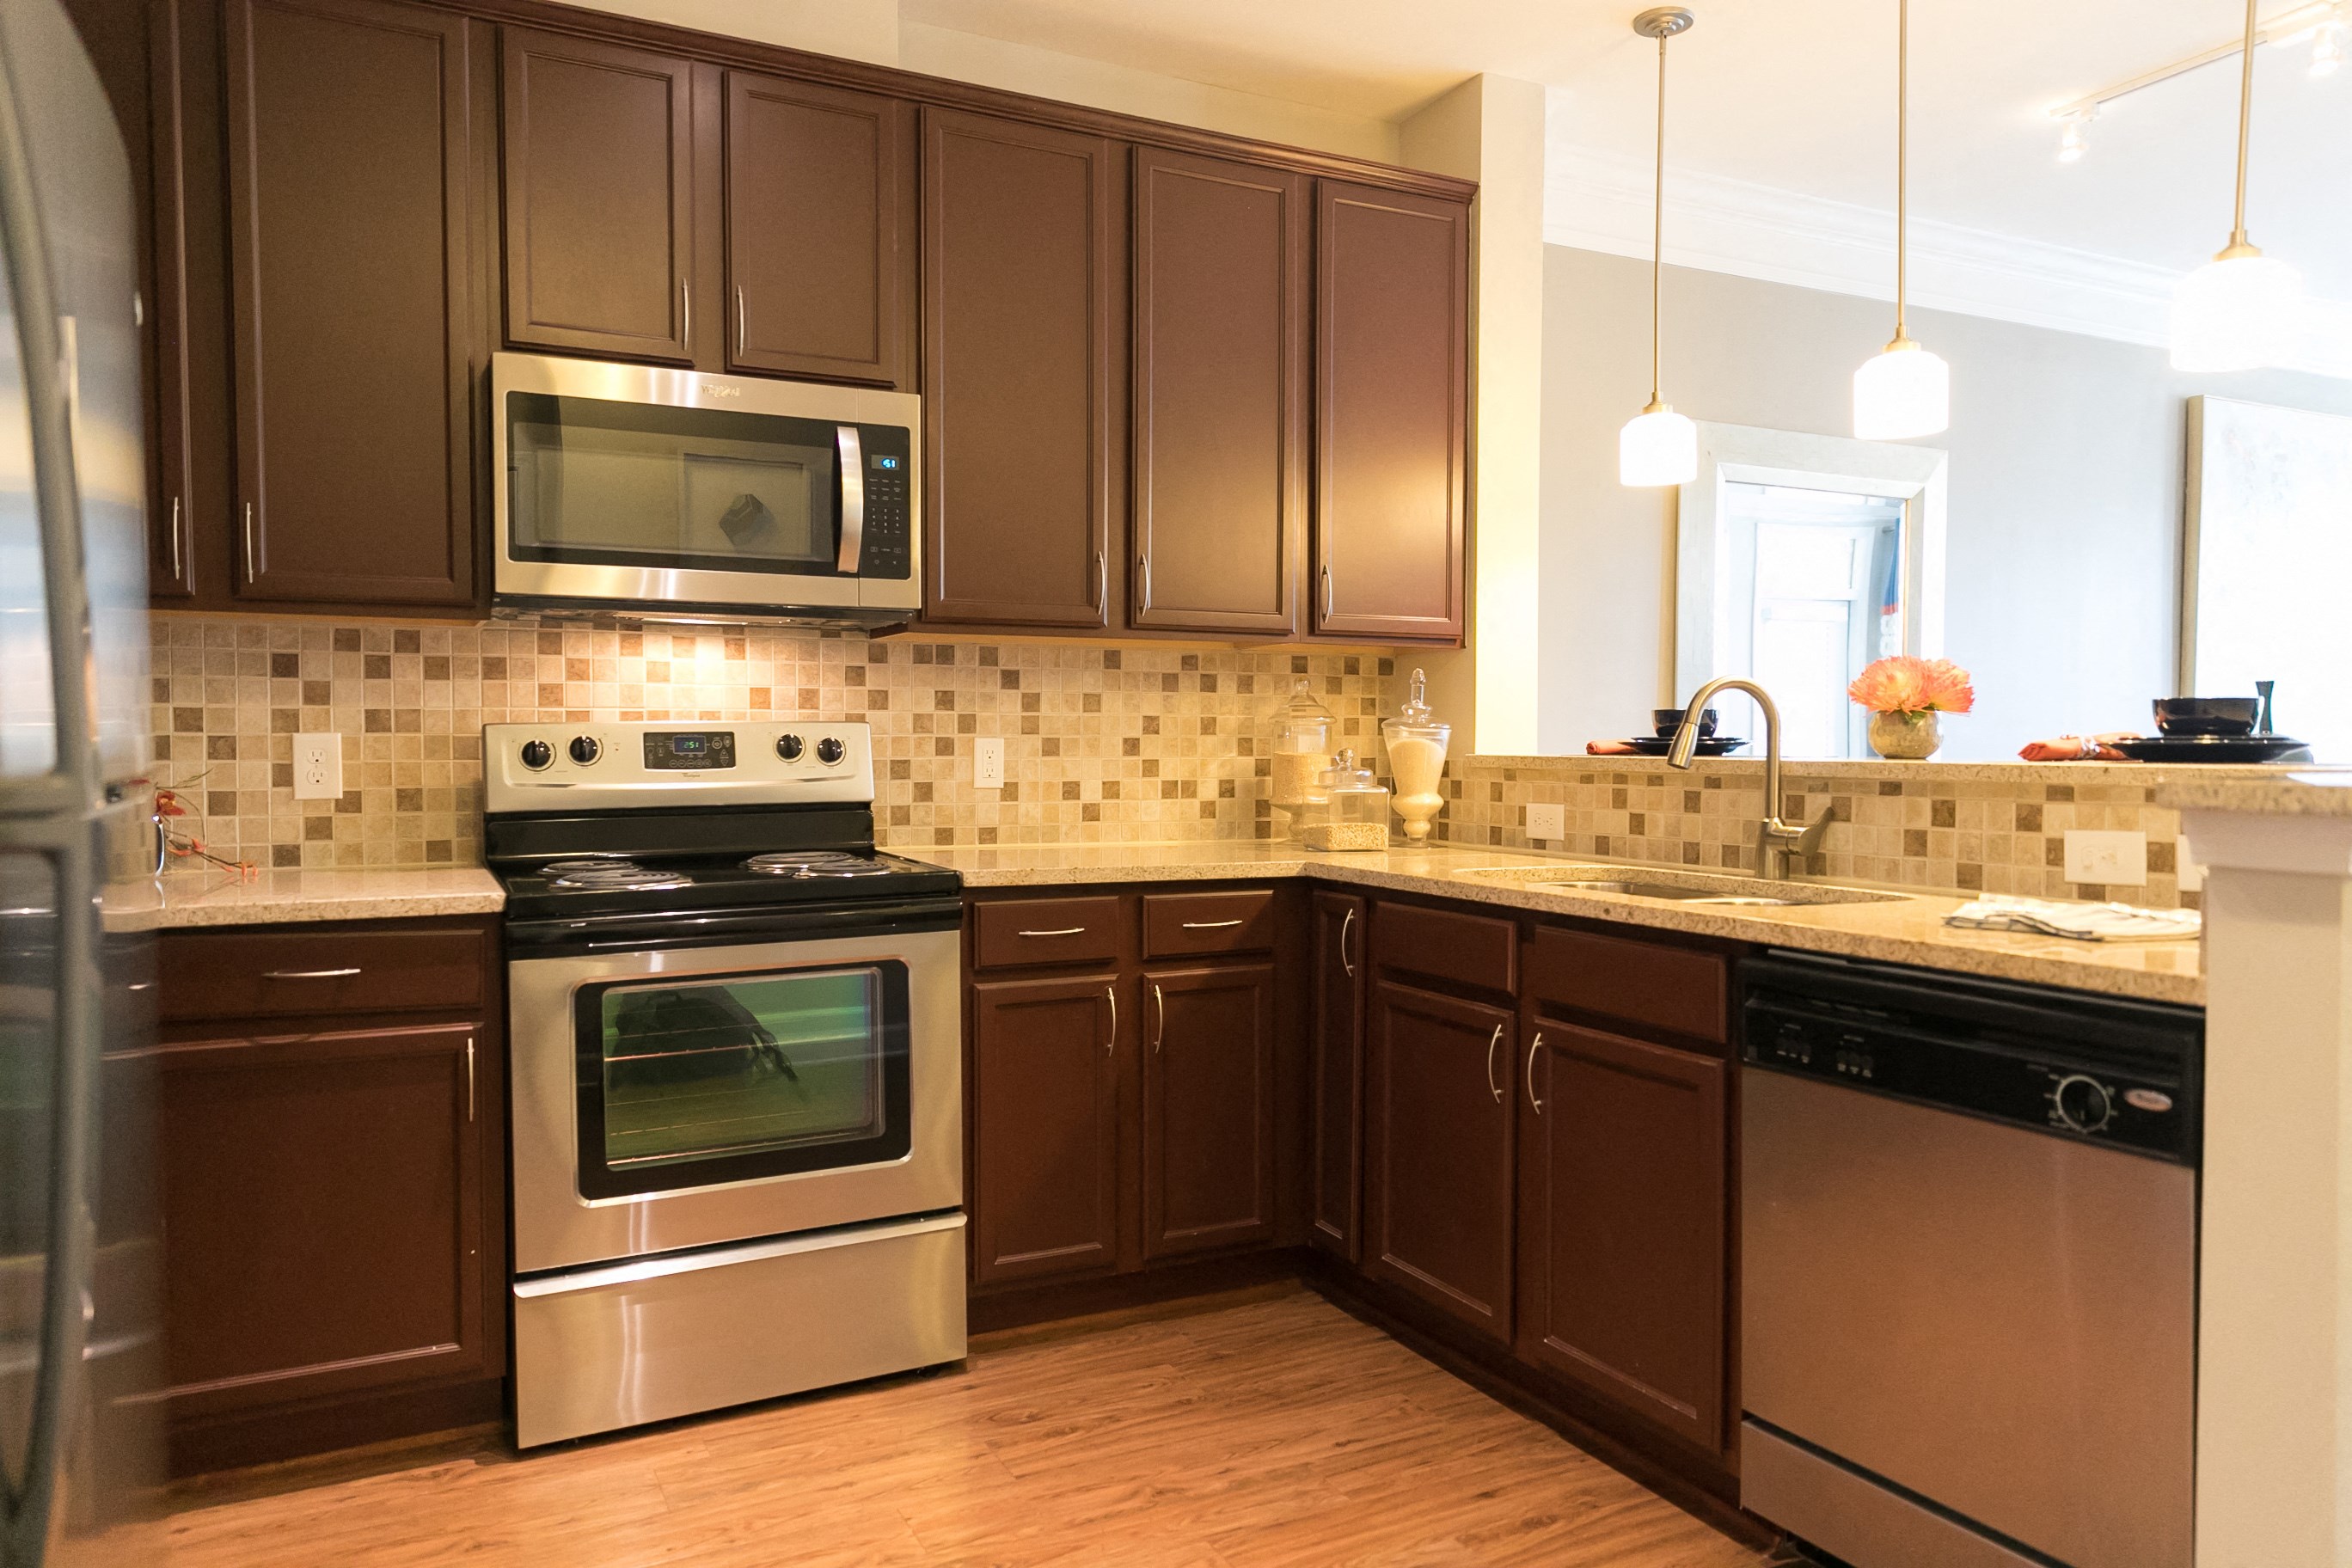 Apartments in Johns Creek for Rent - The Regency at Johns Creek Walk Apartments Kitchen with Stainless Steel Appliances